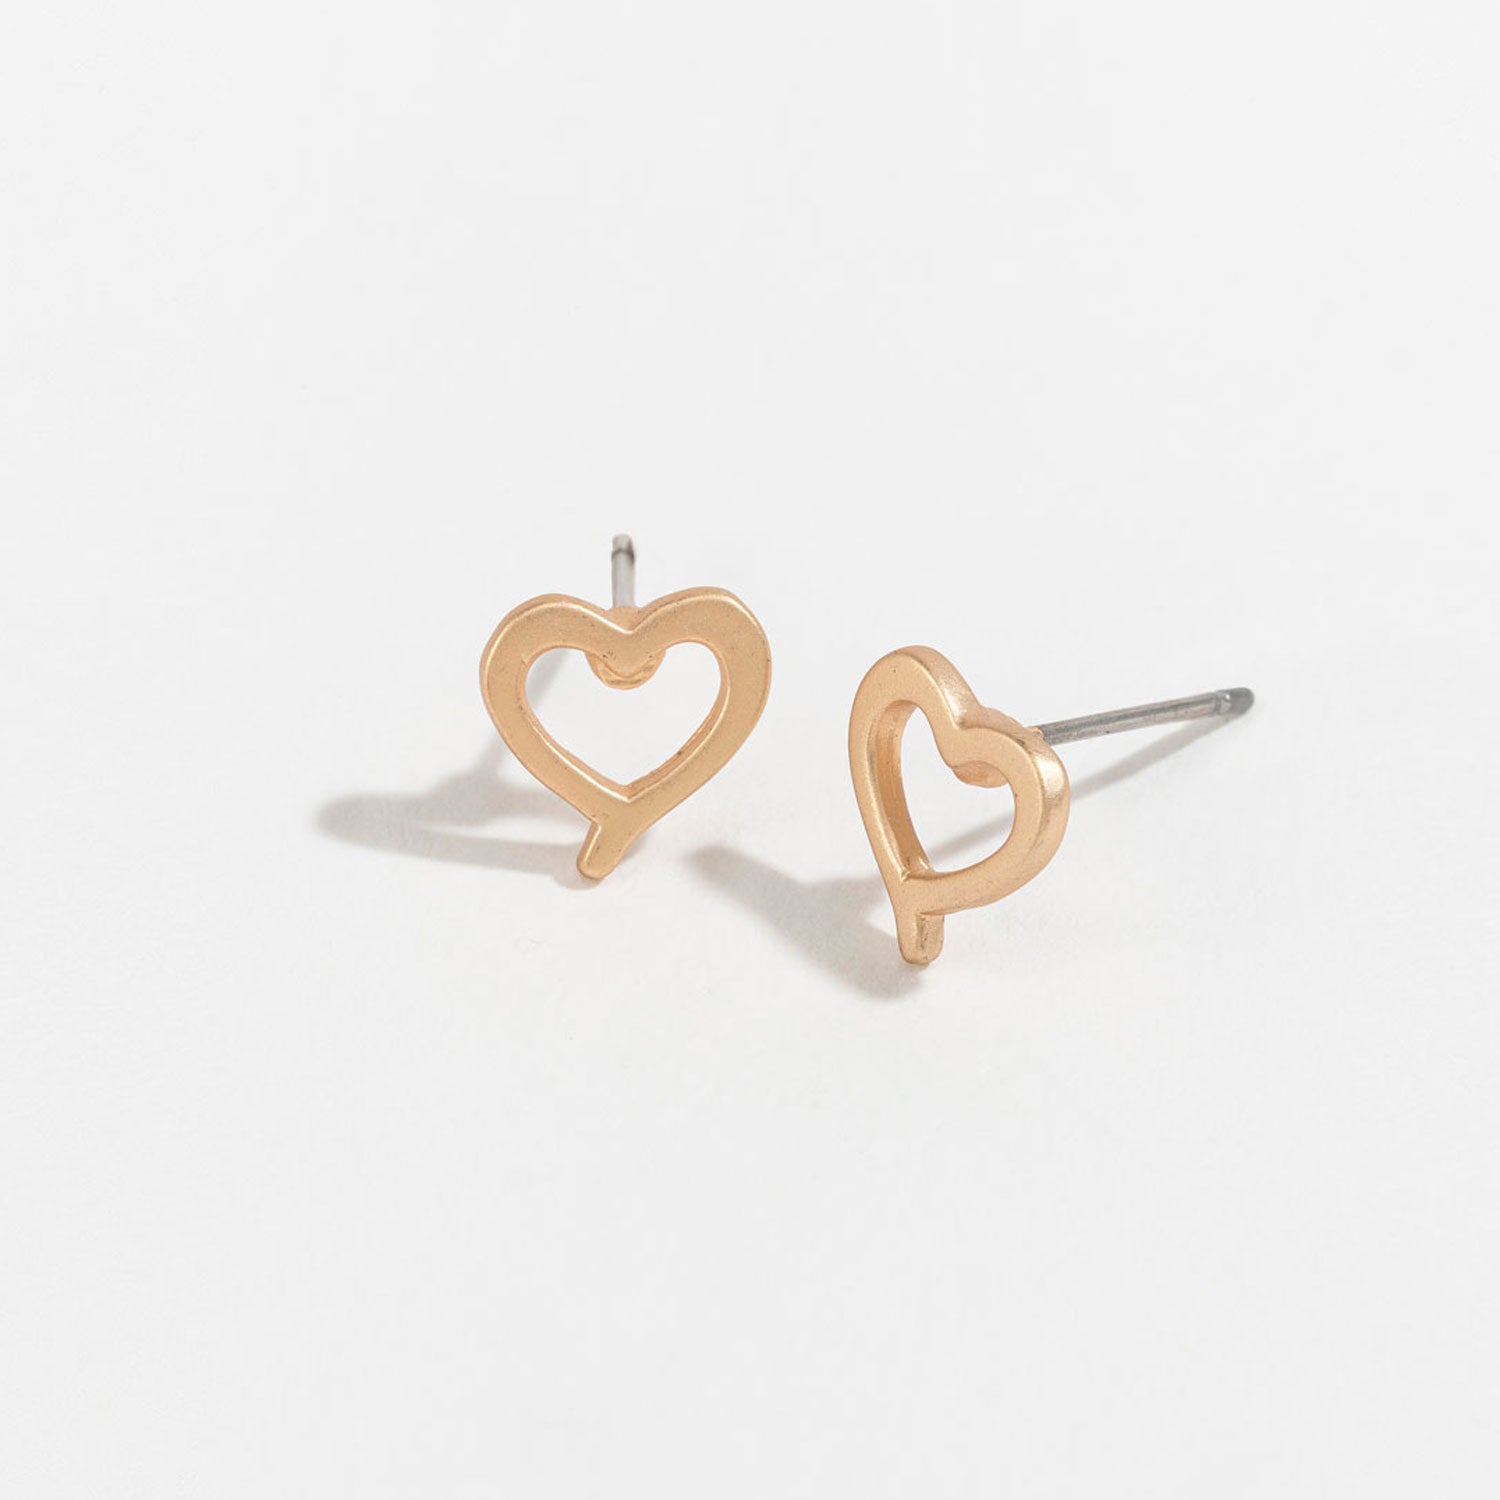 gold heart stud earrings on a white background